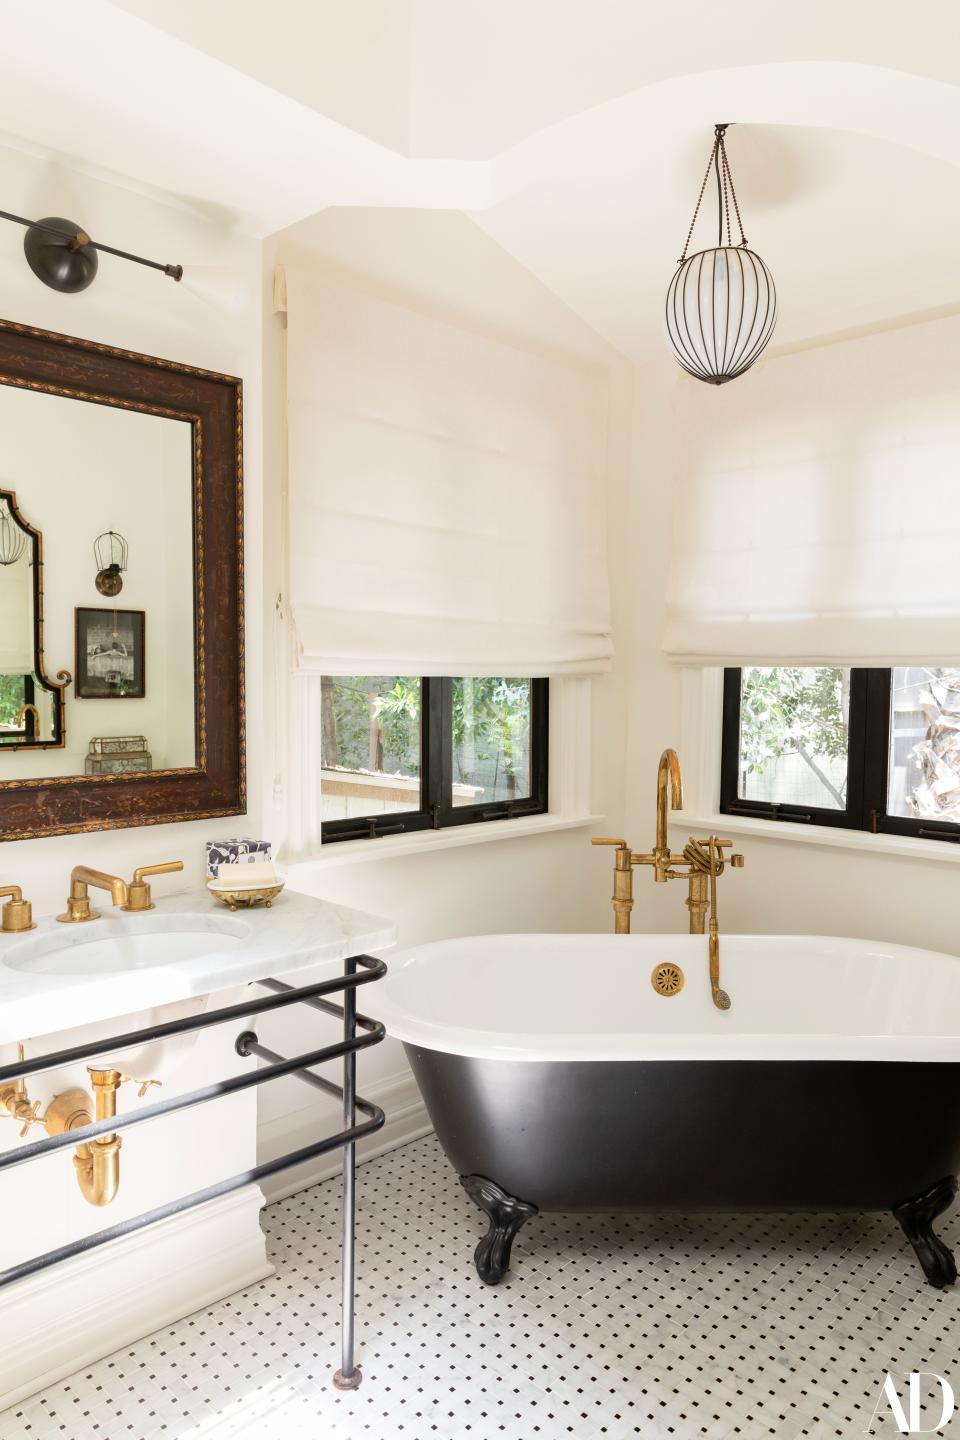 The master bathroom is classic, thanks to the details—which include brass fixtures and smart tiles. In one corner is a picture of Steve McQueen, bathing with his first of three wives, Niele Adams. Stamos shares: “She came to a party and I asked her to sign it,” Stamos recalls. “It says something like, ‘You’re more handsome than he was.’”